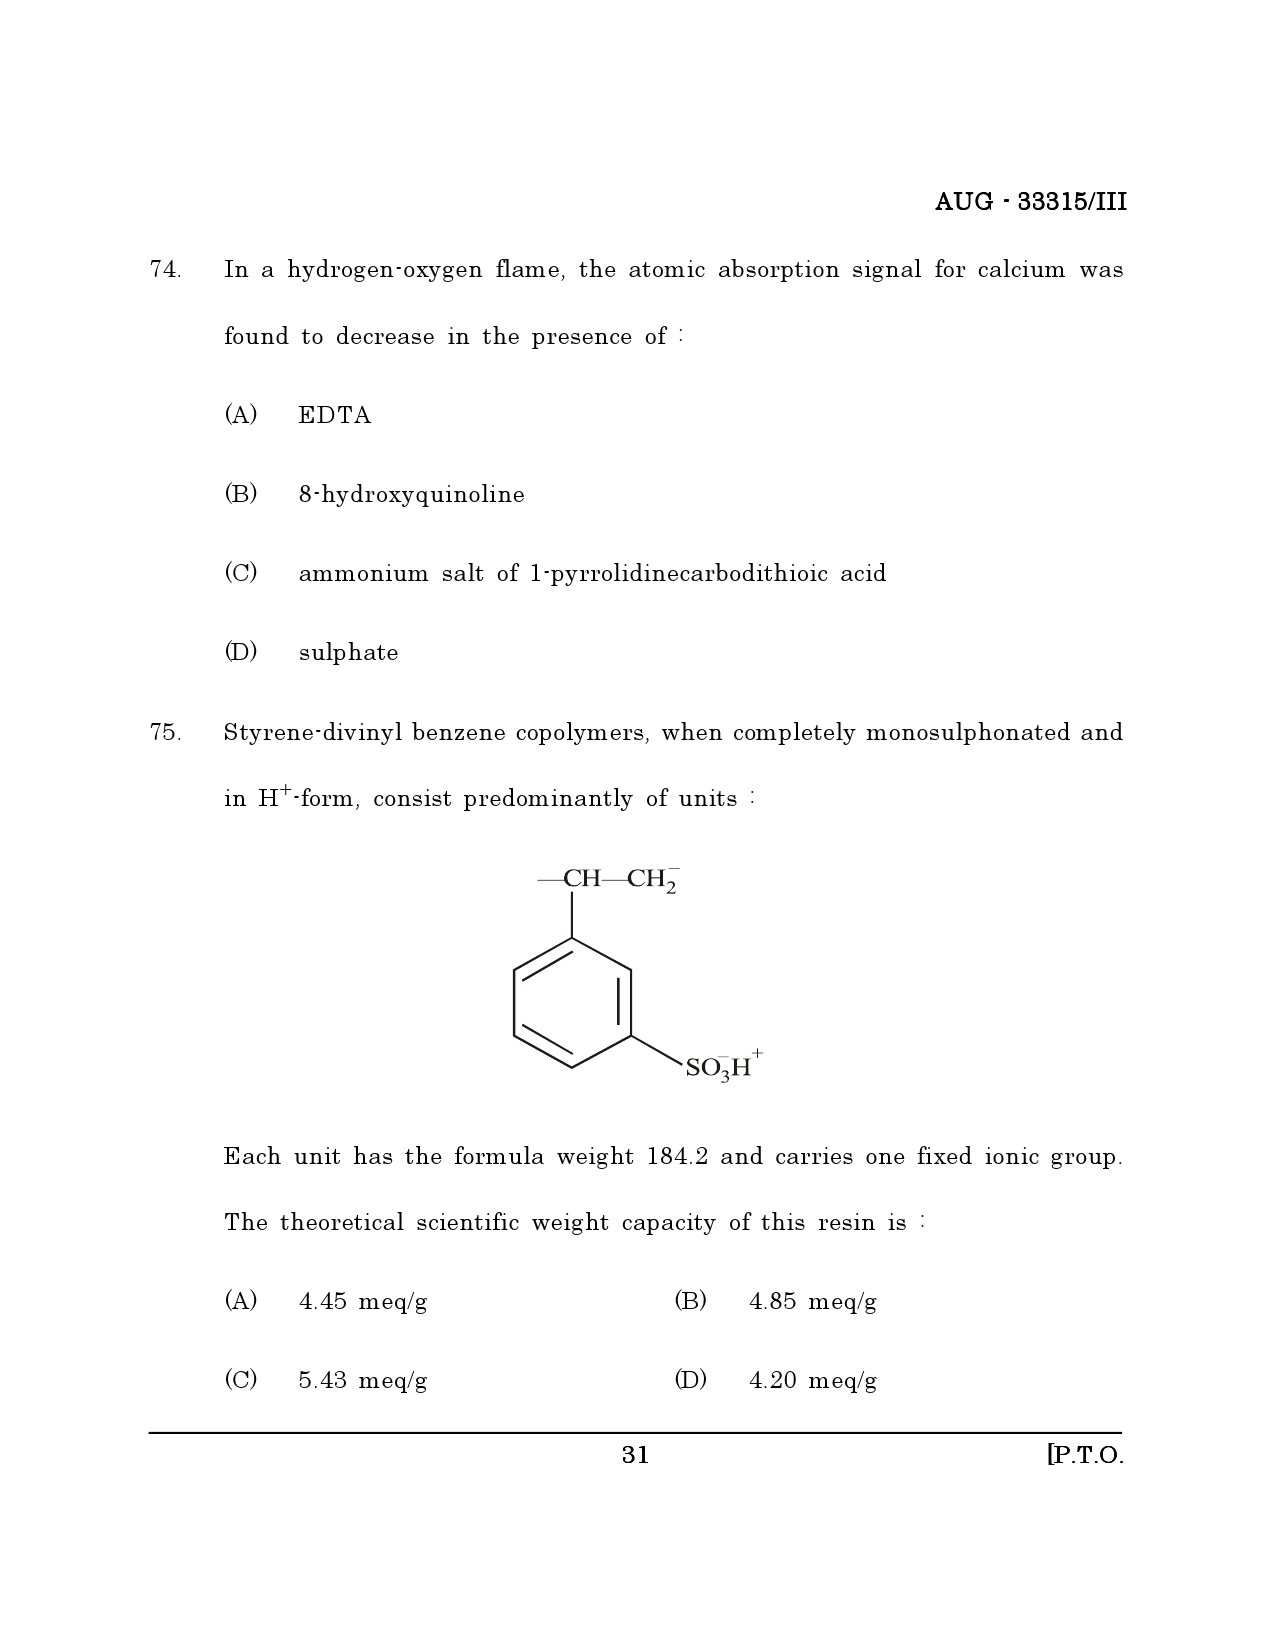 Maharashtra SET Chemical Sciences Question Paper III August 2015 30